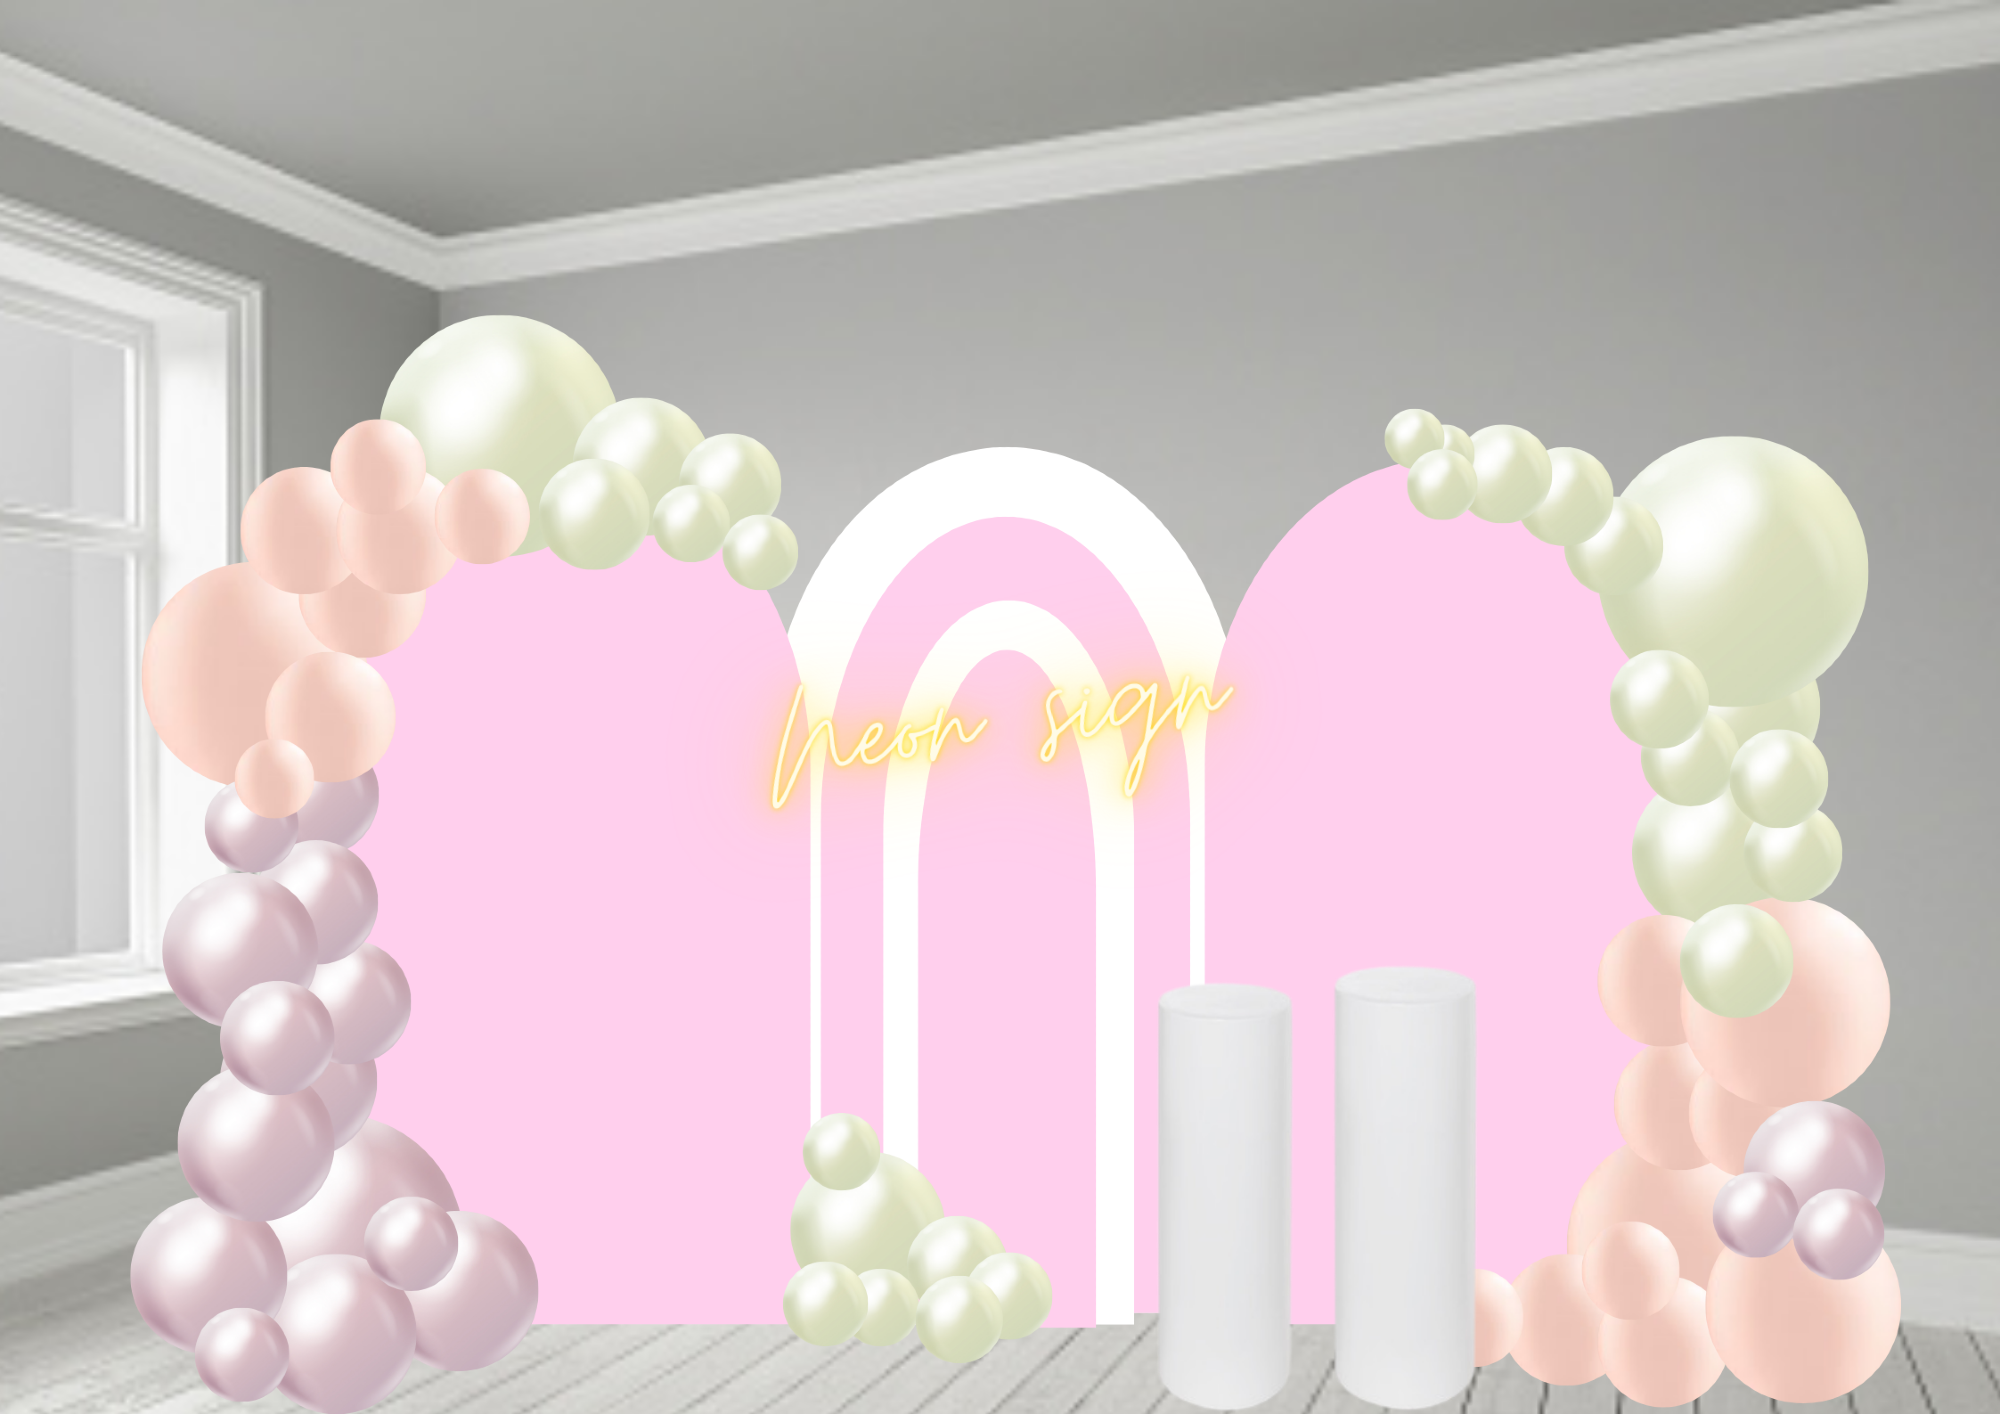 Balloon arch 3 x backdrop with neon sign.